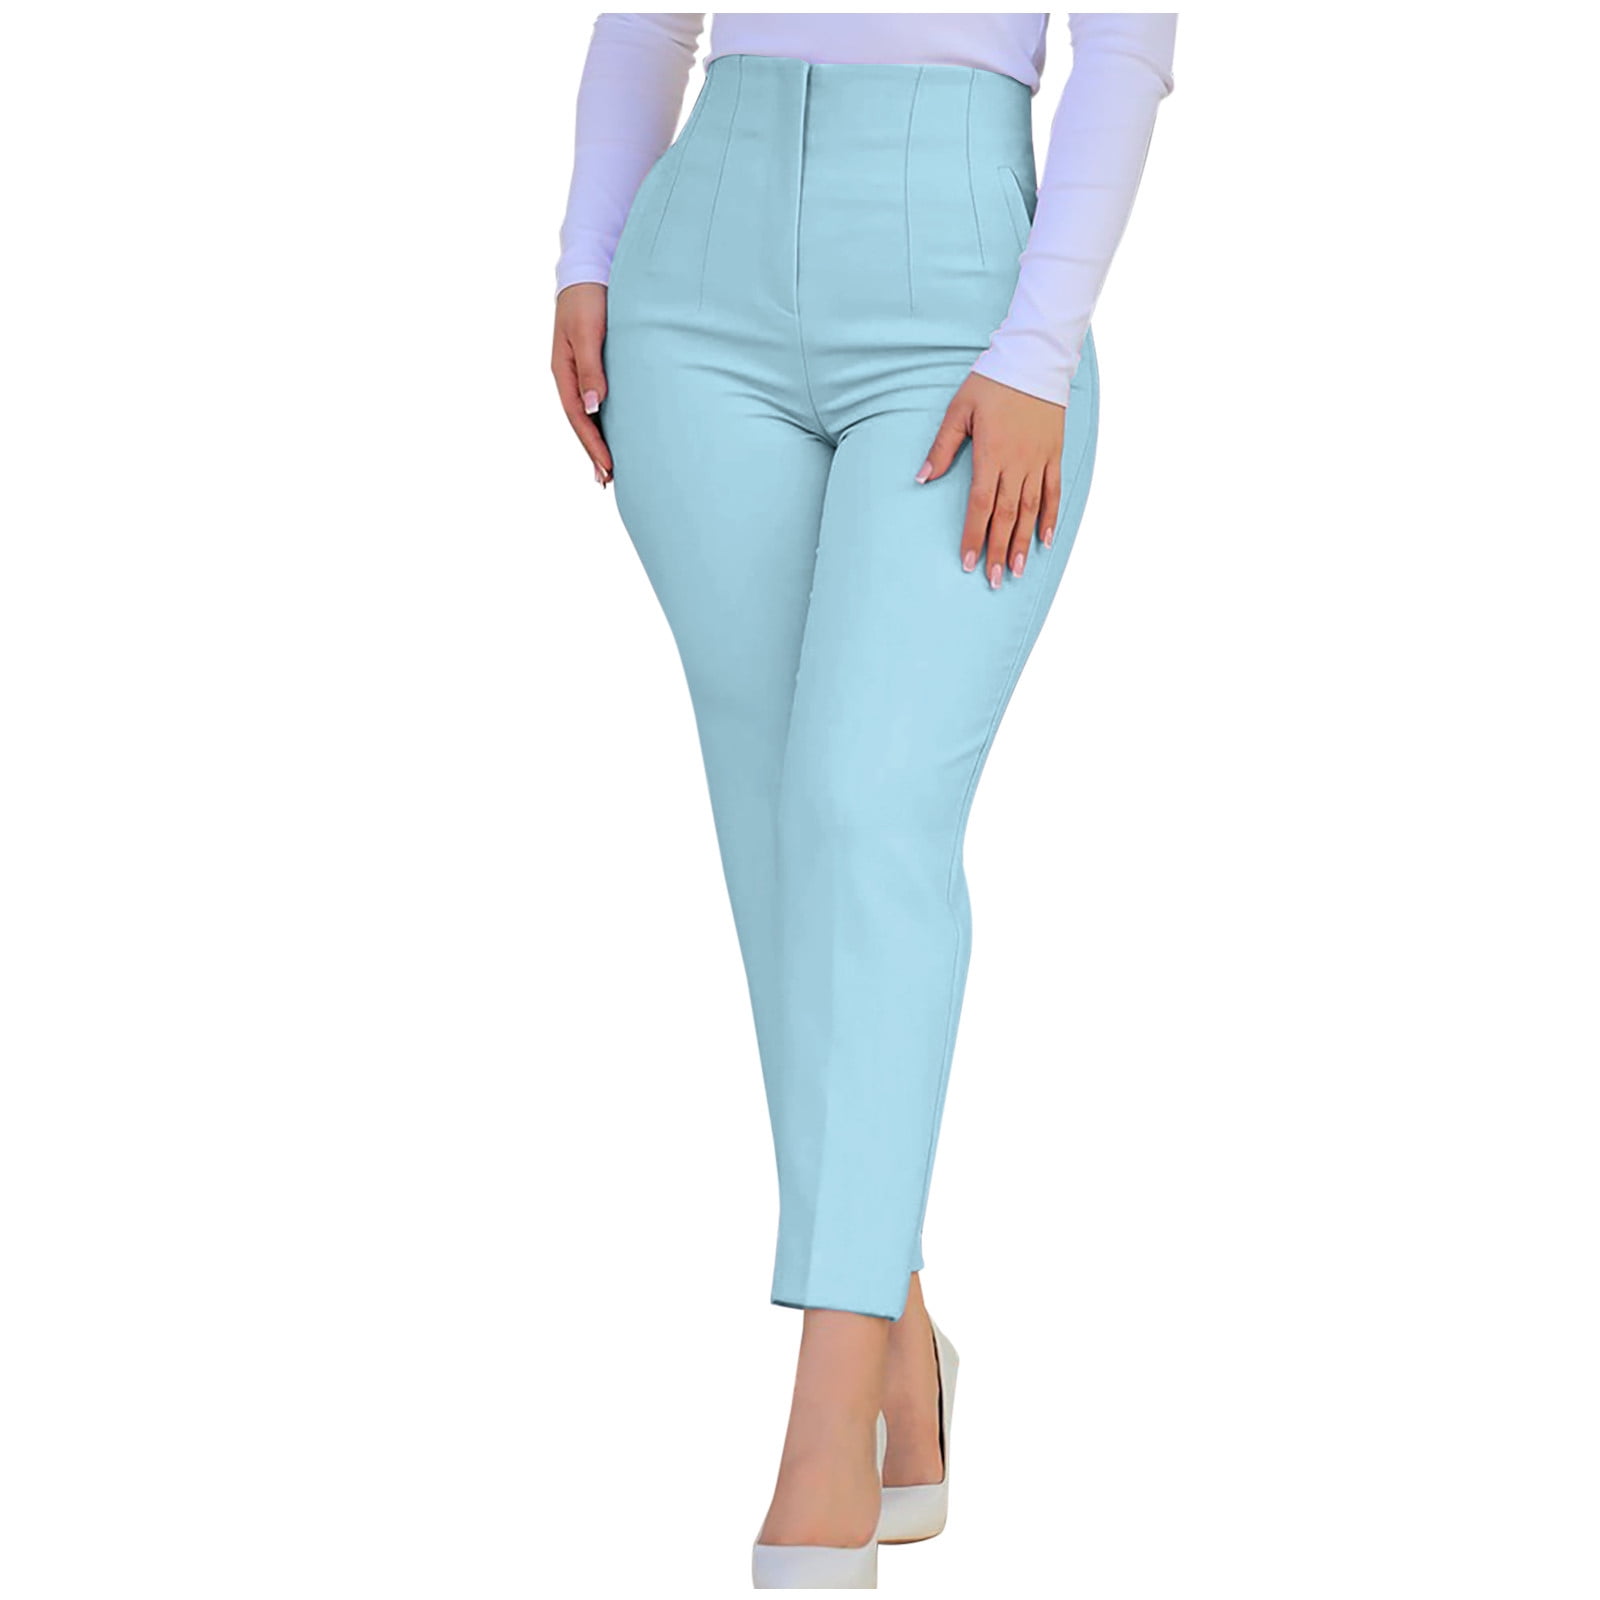 RYRJJ Women s Cropped Dress Pants with Pockets Business Office Casual Pleated High Waist Slim Fit Pencil Pants for Work Trousers Light Blue M f64e0c67 95cc 4bb1 82e2 0310f1b0c605.6120fe08c9e7d13f03d28b6dce93b3b9